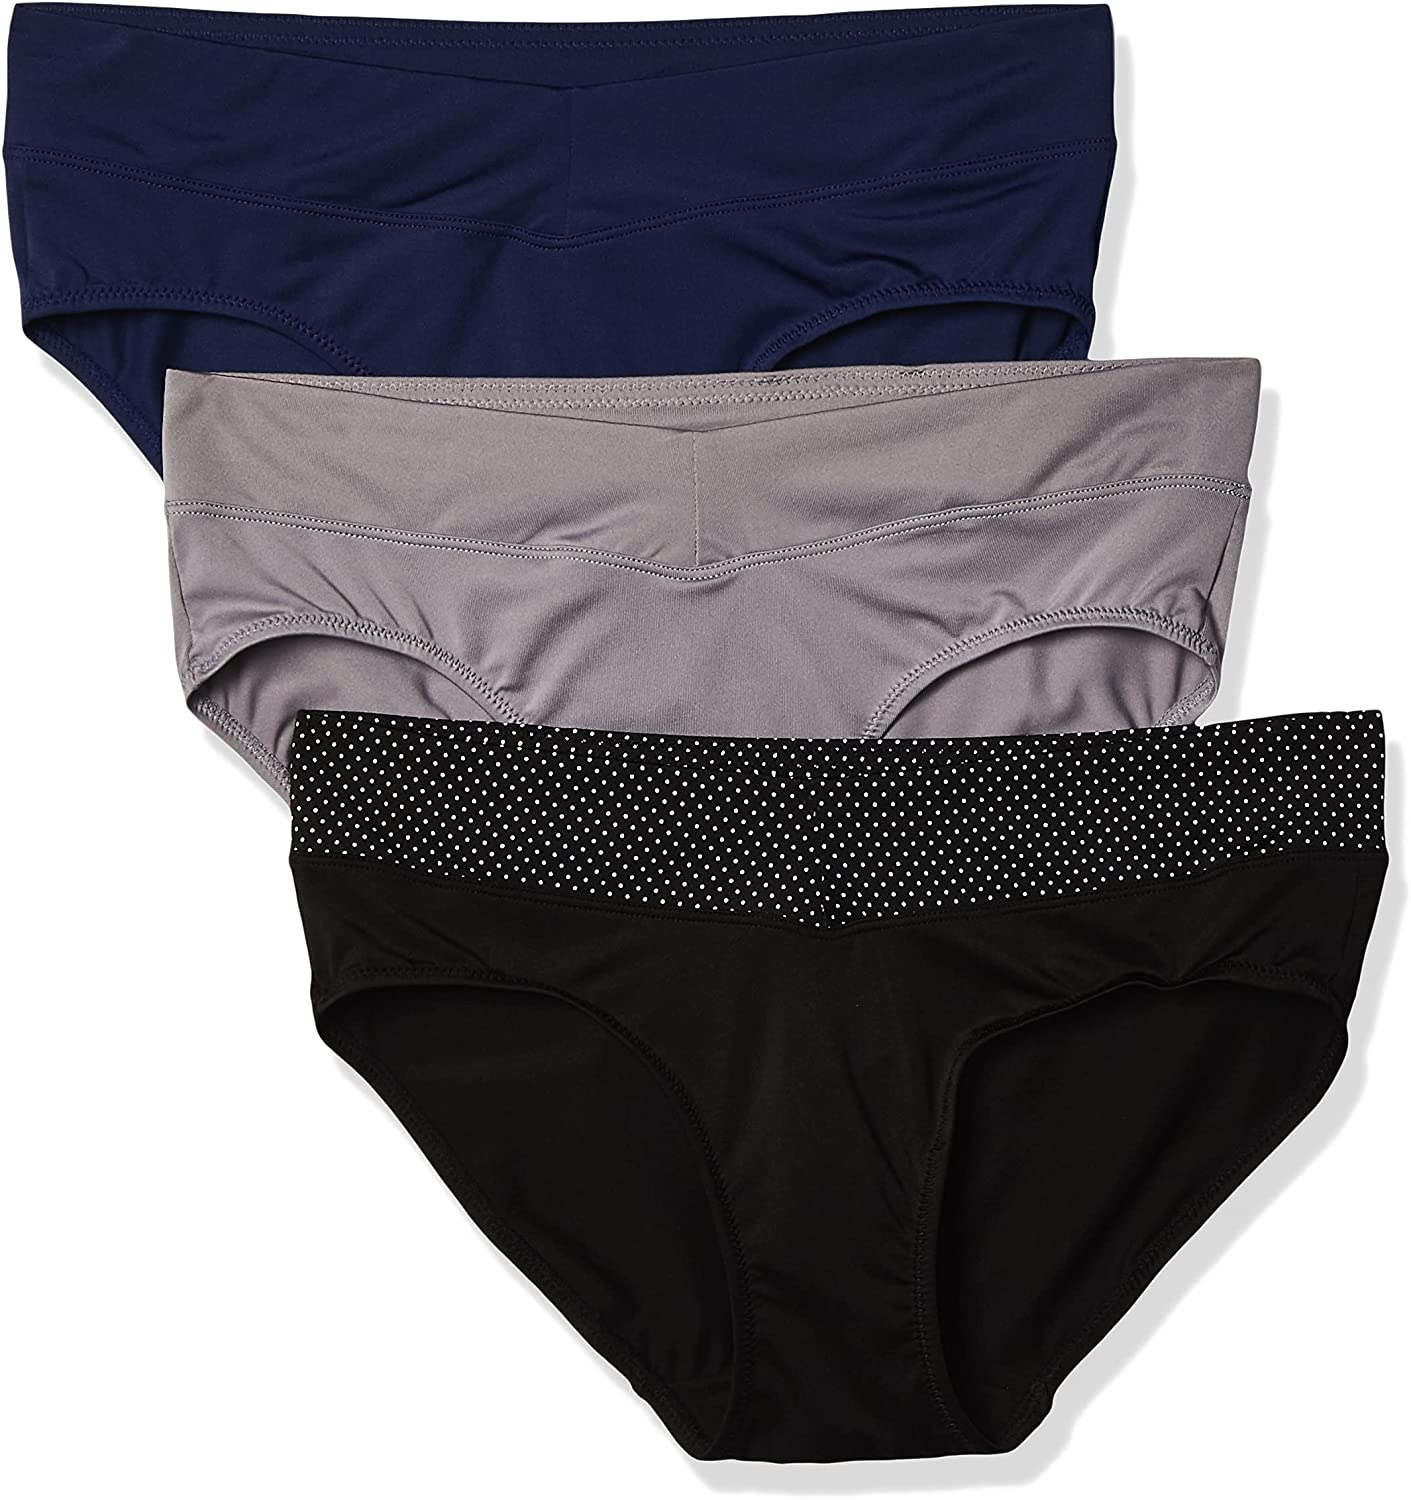 Warner's womens Blissful Benefits No Muffin Top 3 Pack Hipster Panties